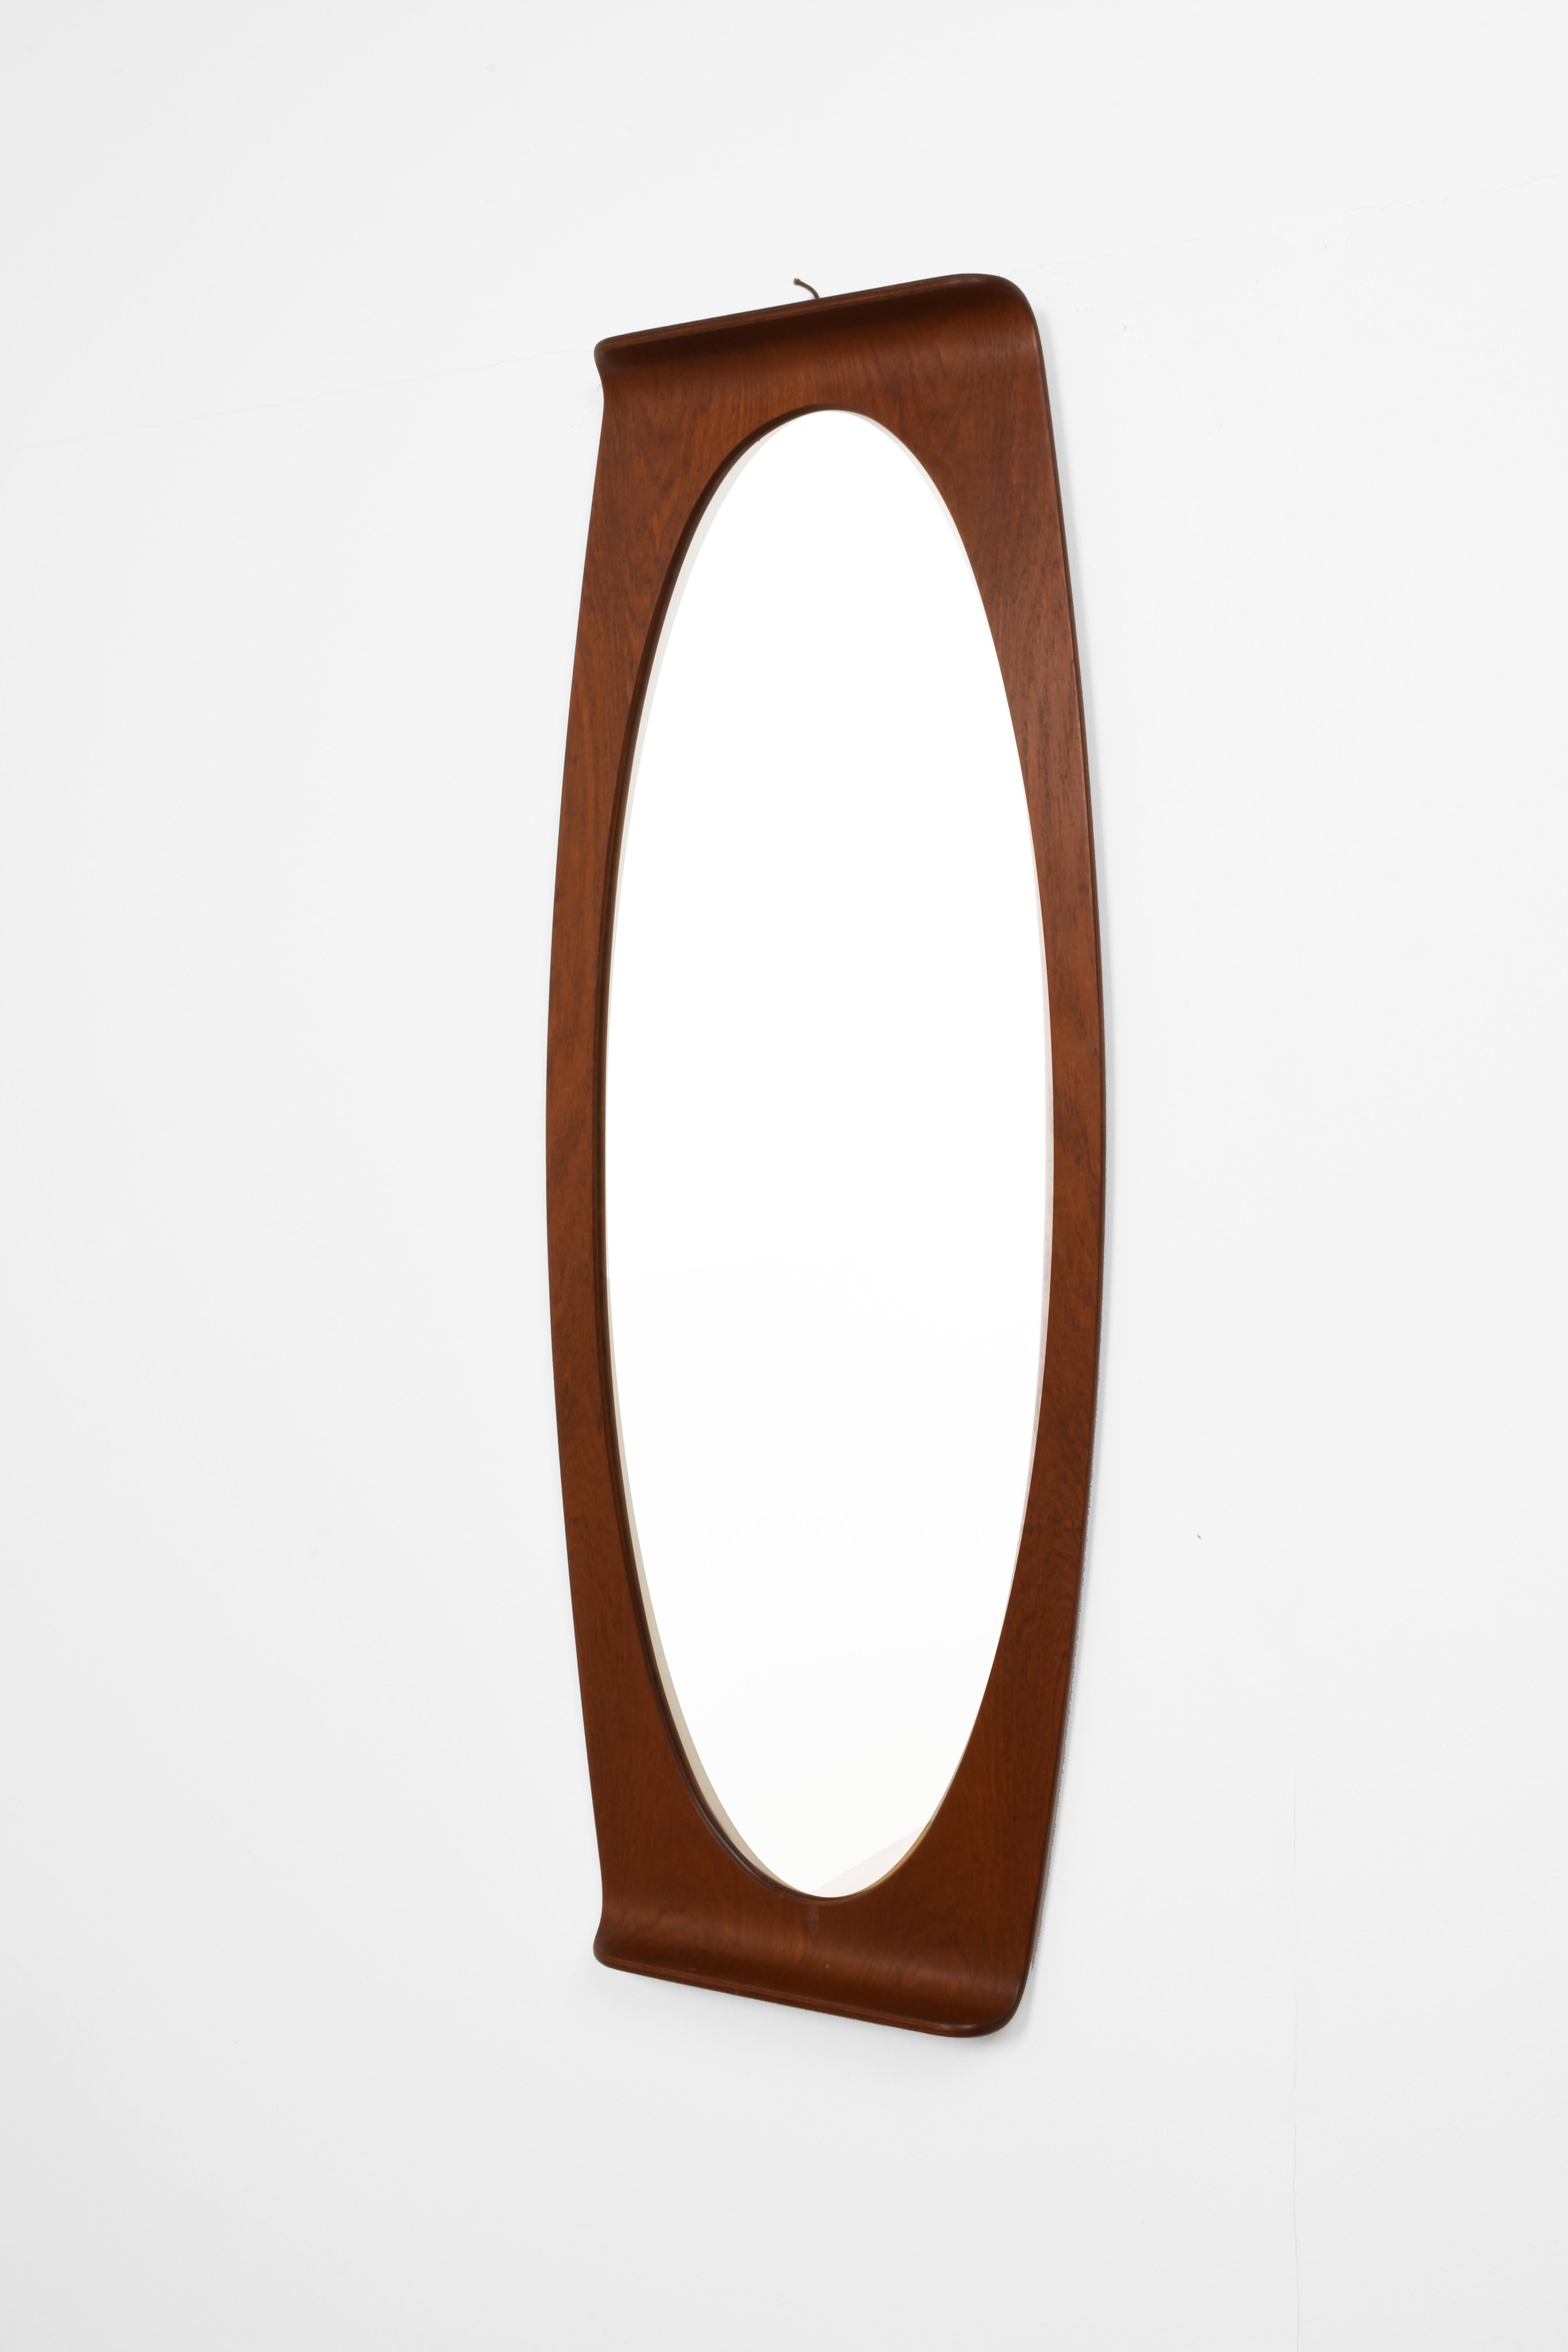 Carved Franco Campo and Carlo Graffi Wall Mirror in Curved Wood, Italy, 1960s